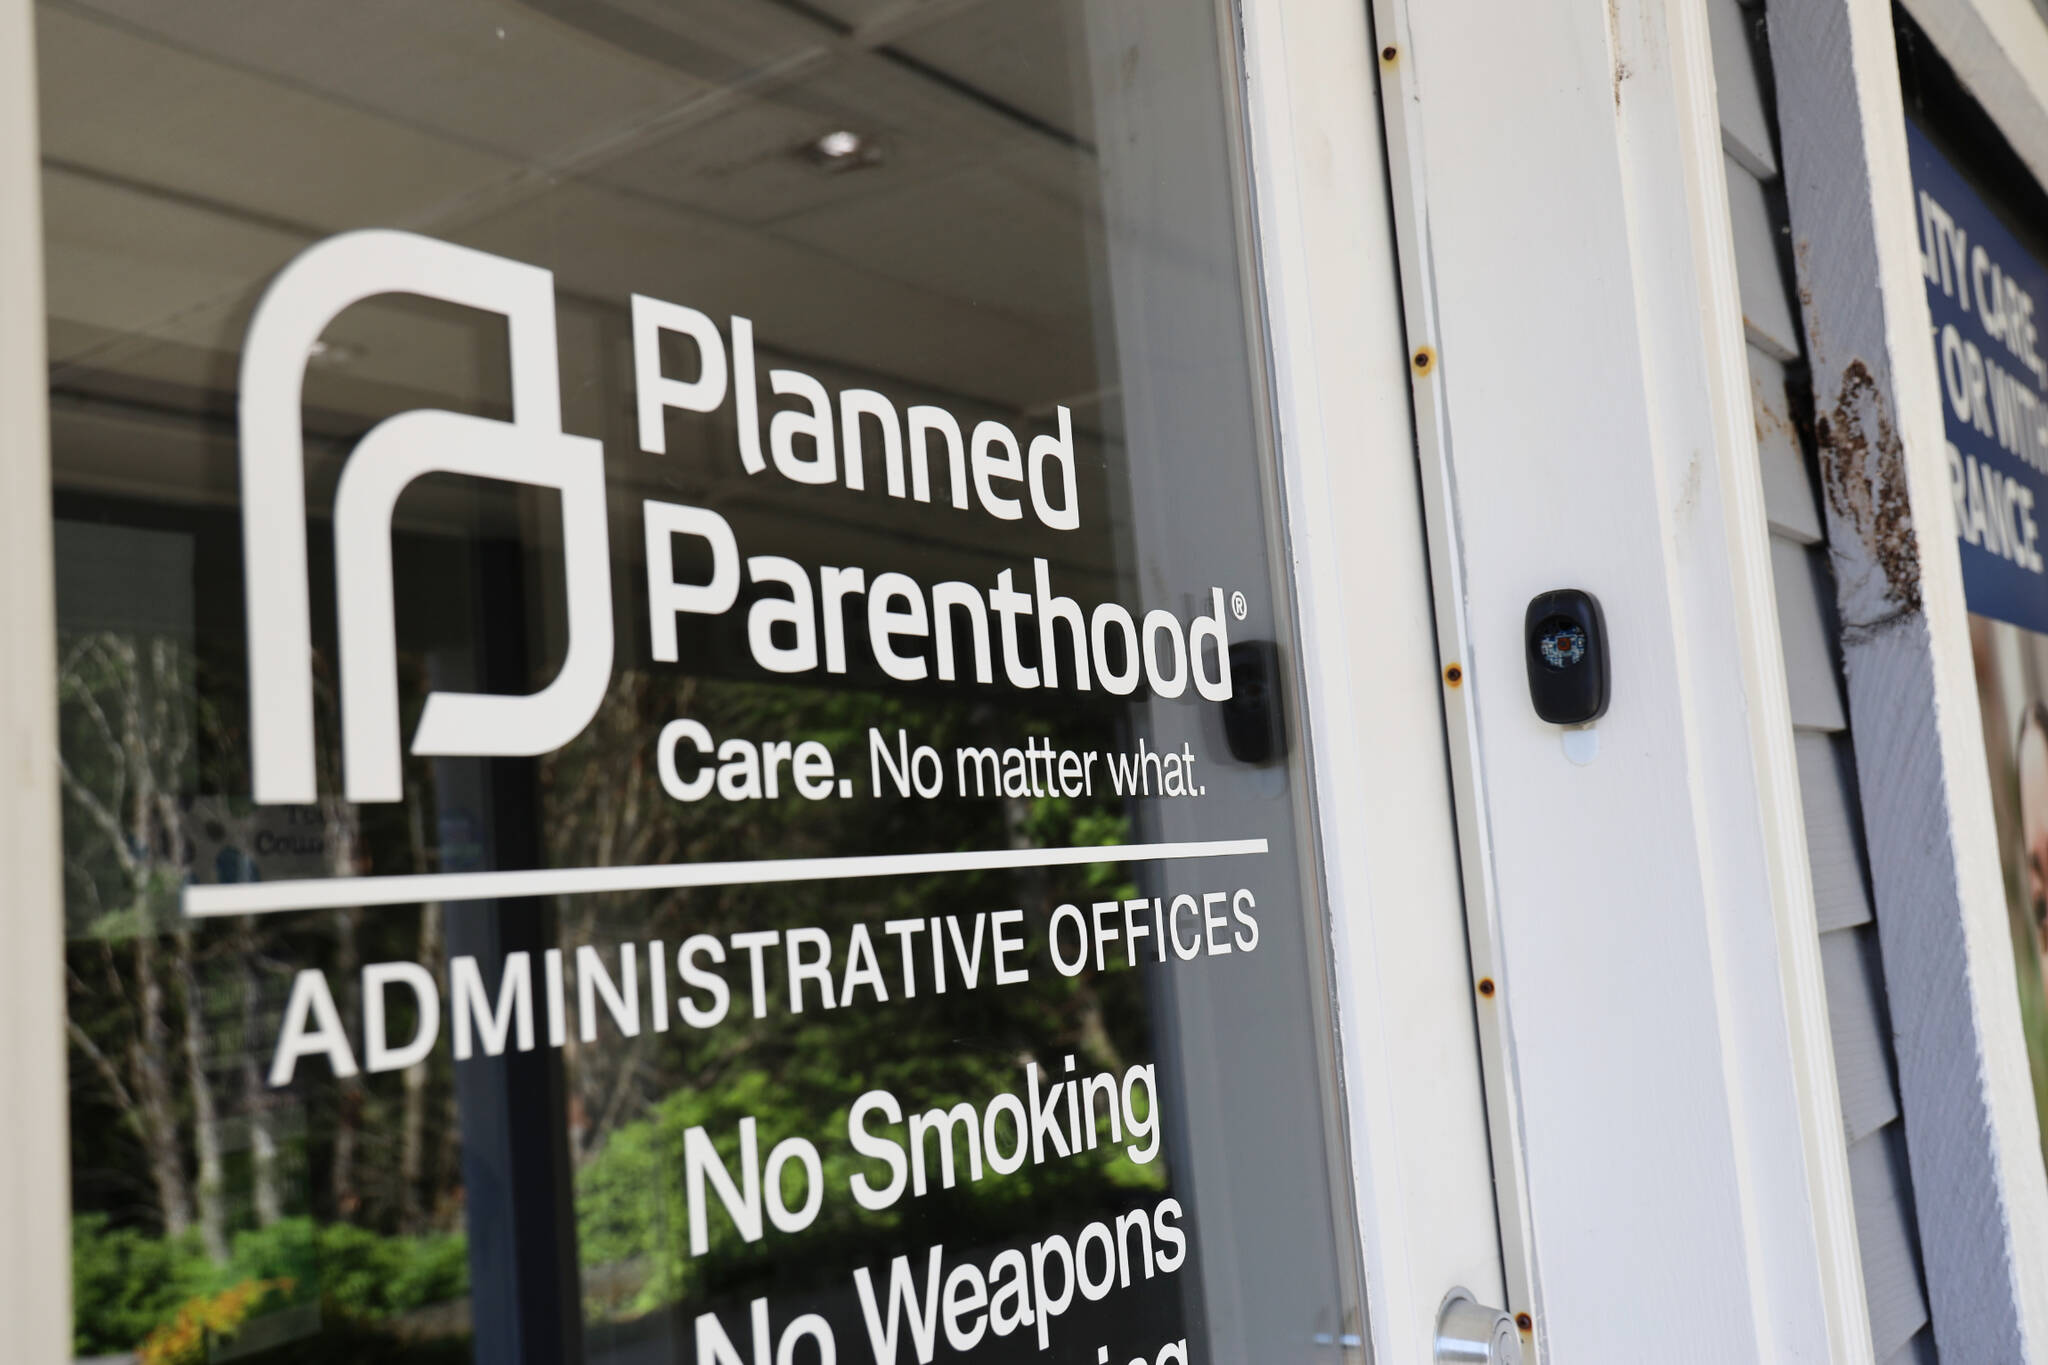 Planned Parenthood’s location in Juneau is now offering vasectomy services as of Wednesday and a procedure day will take place every two months, officials say. (Clarise Larson / Juneau Empire)